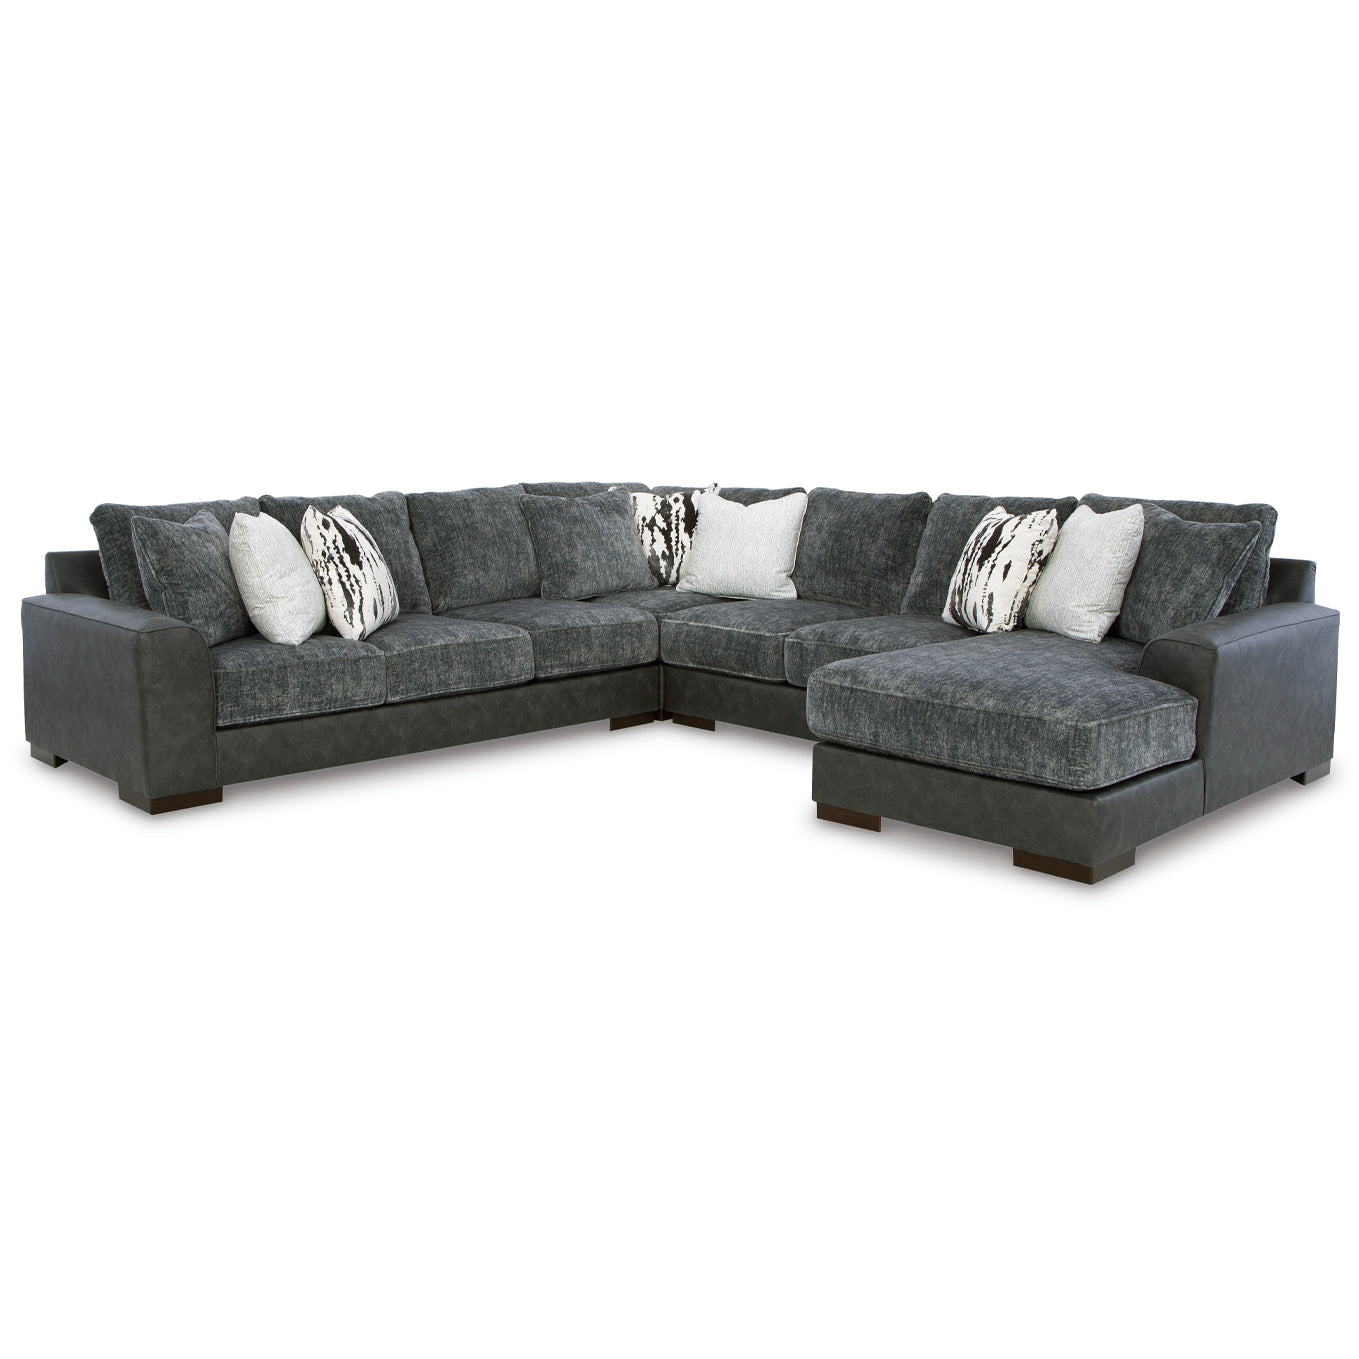 Larkstone 4-Piece Sectional with Chaise in Pewter Color